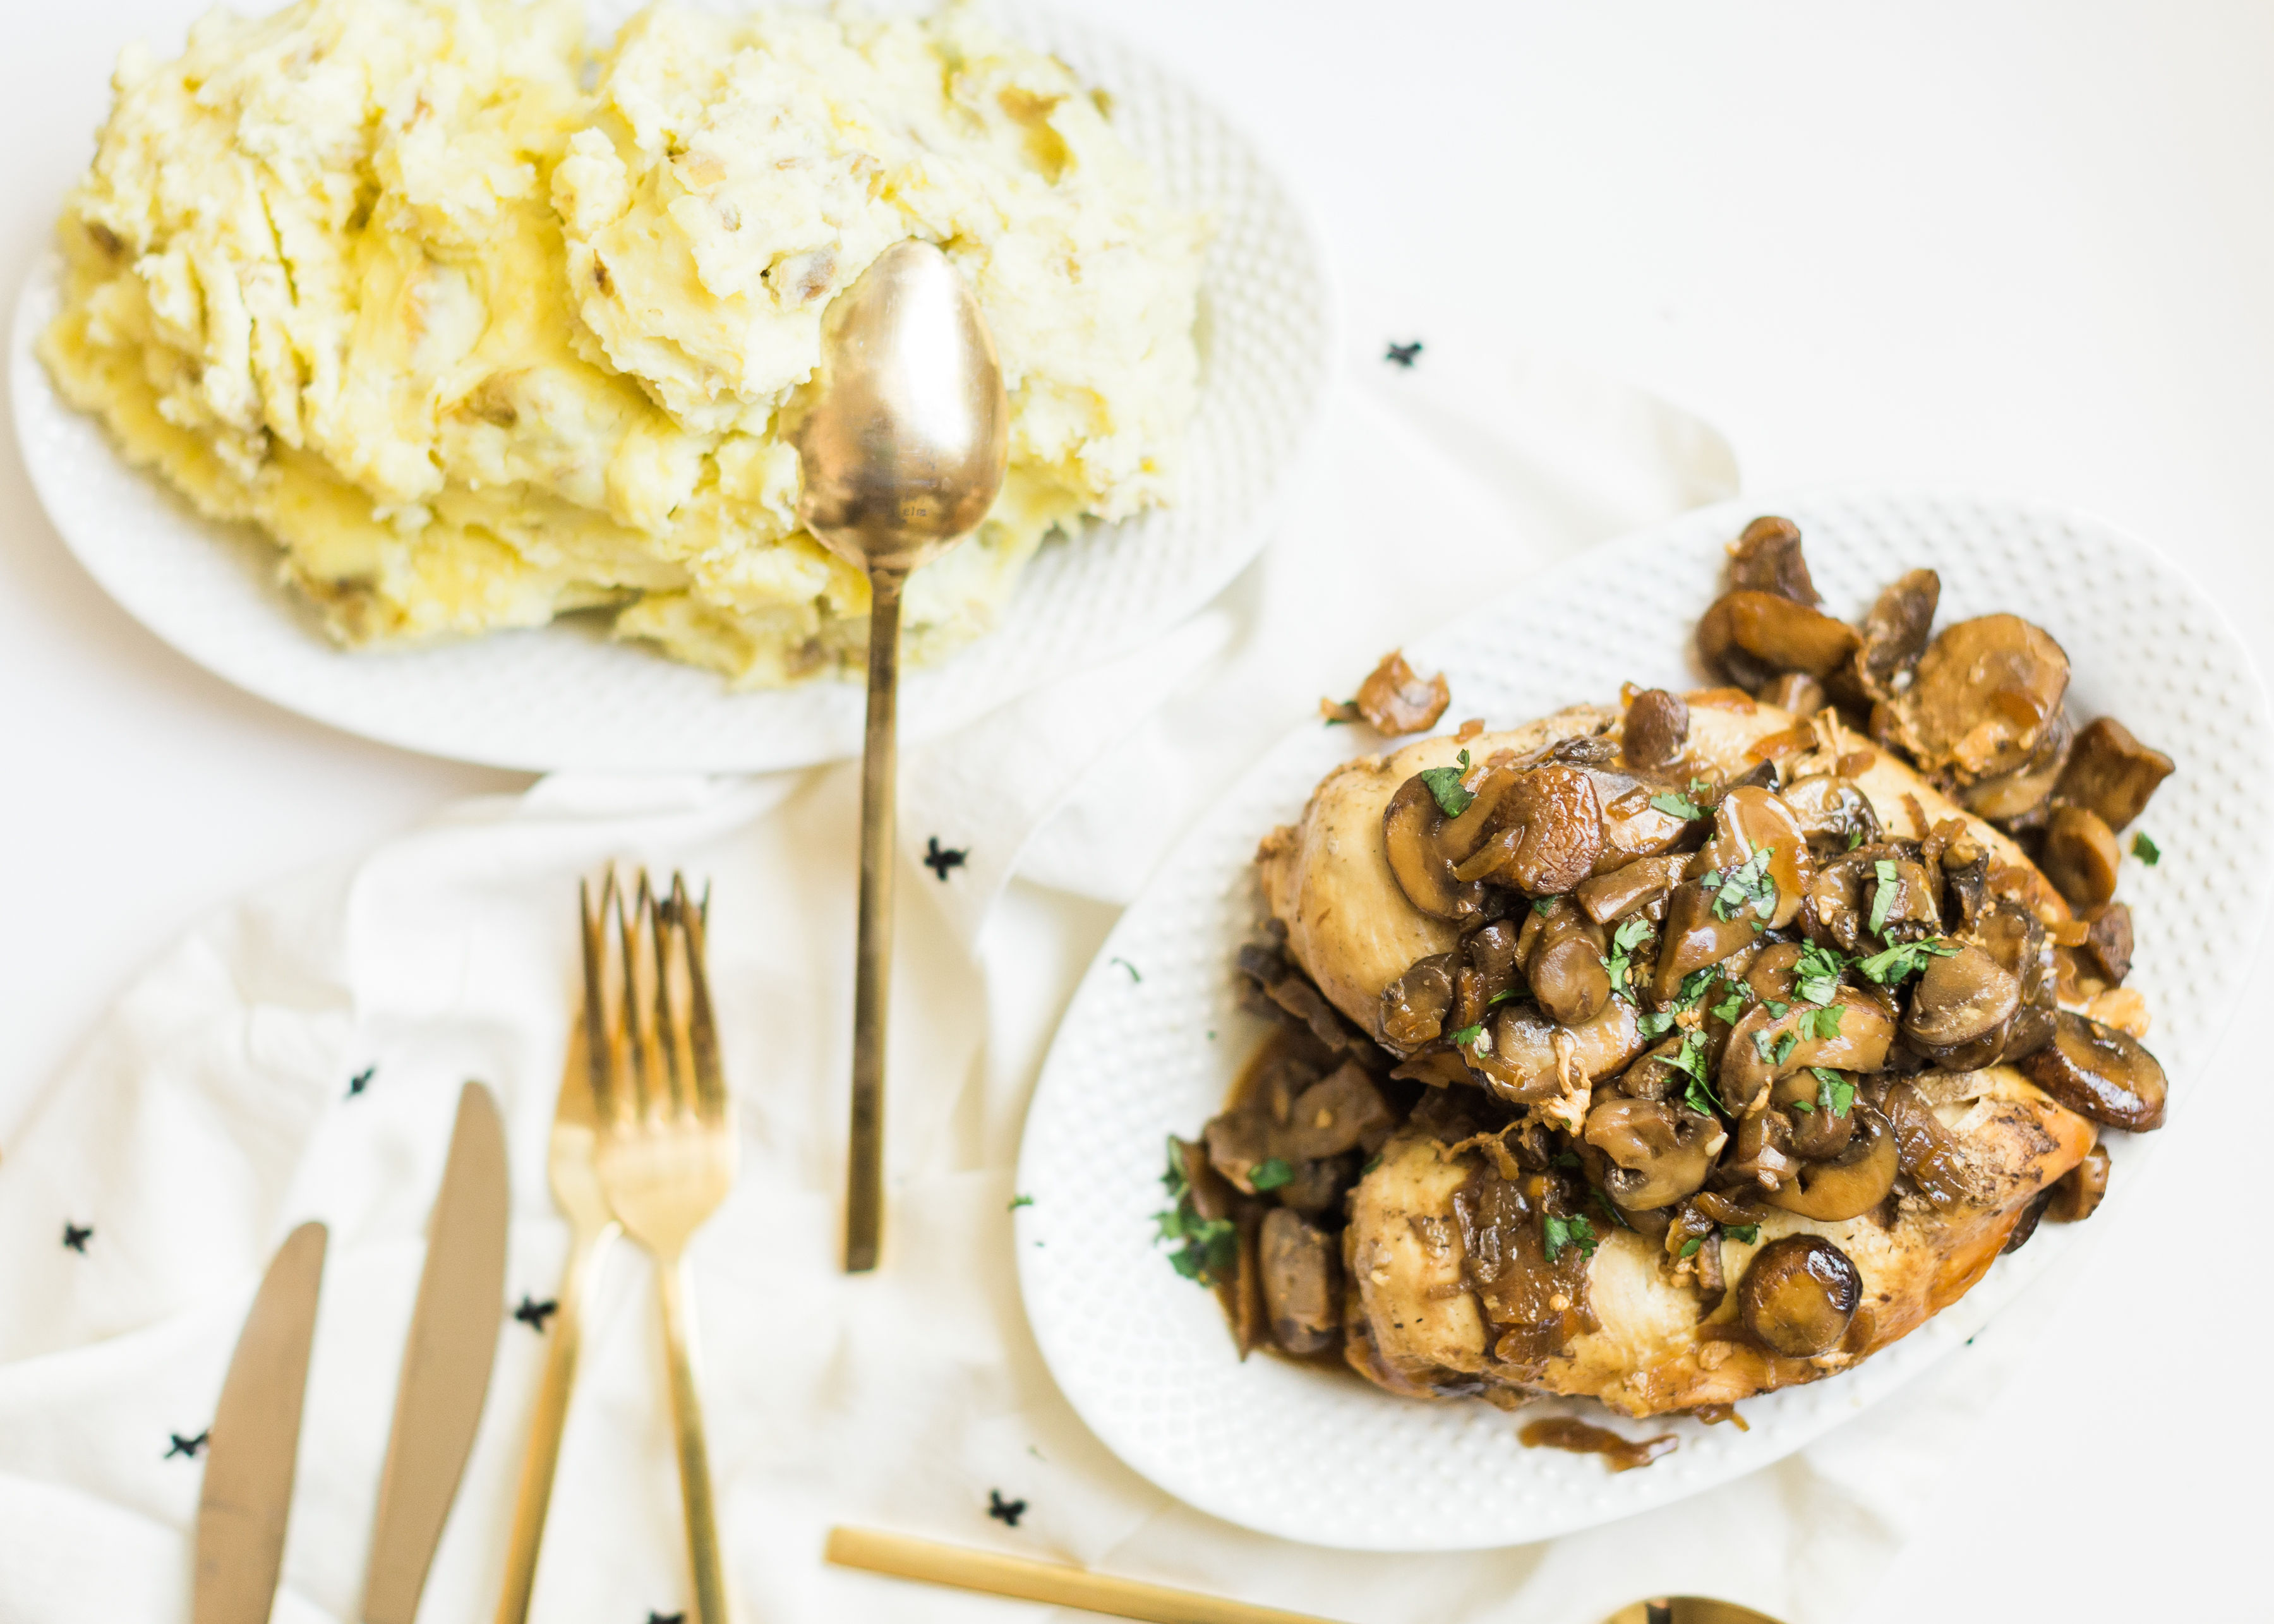 Mashed Potato and Chicken Marsala in an Instant Pot